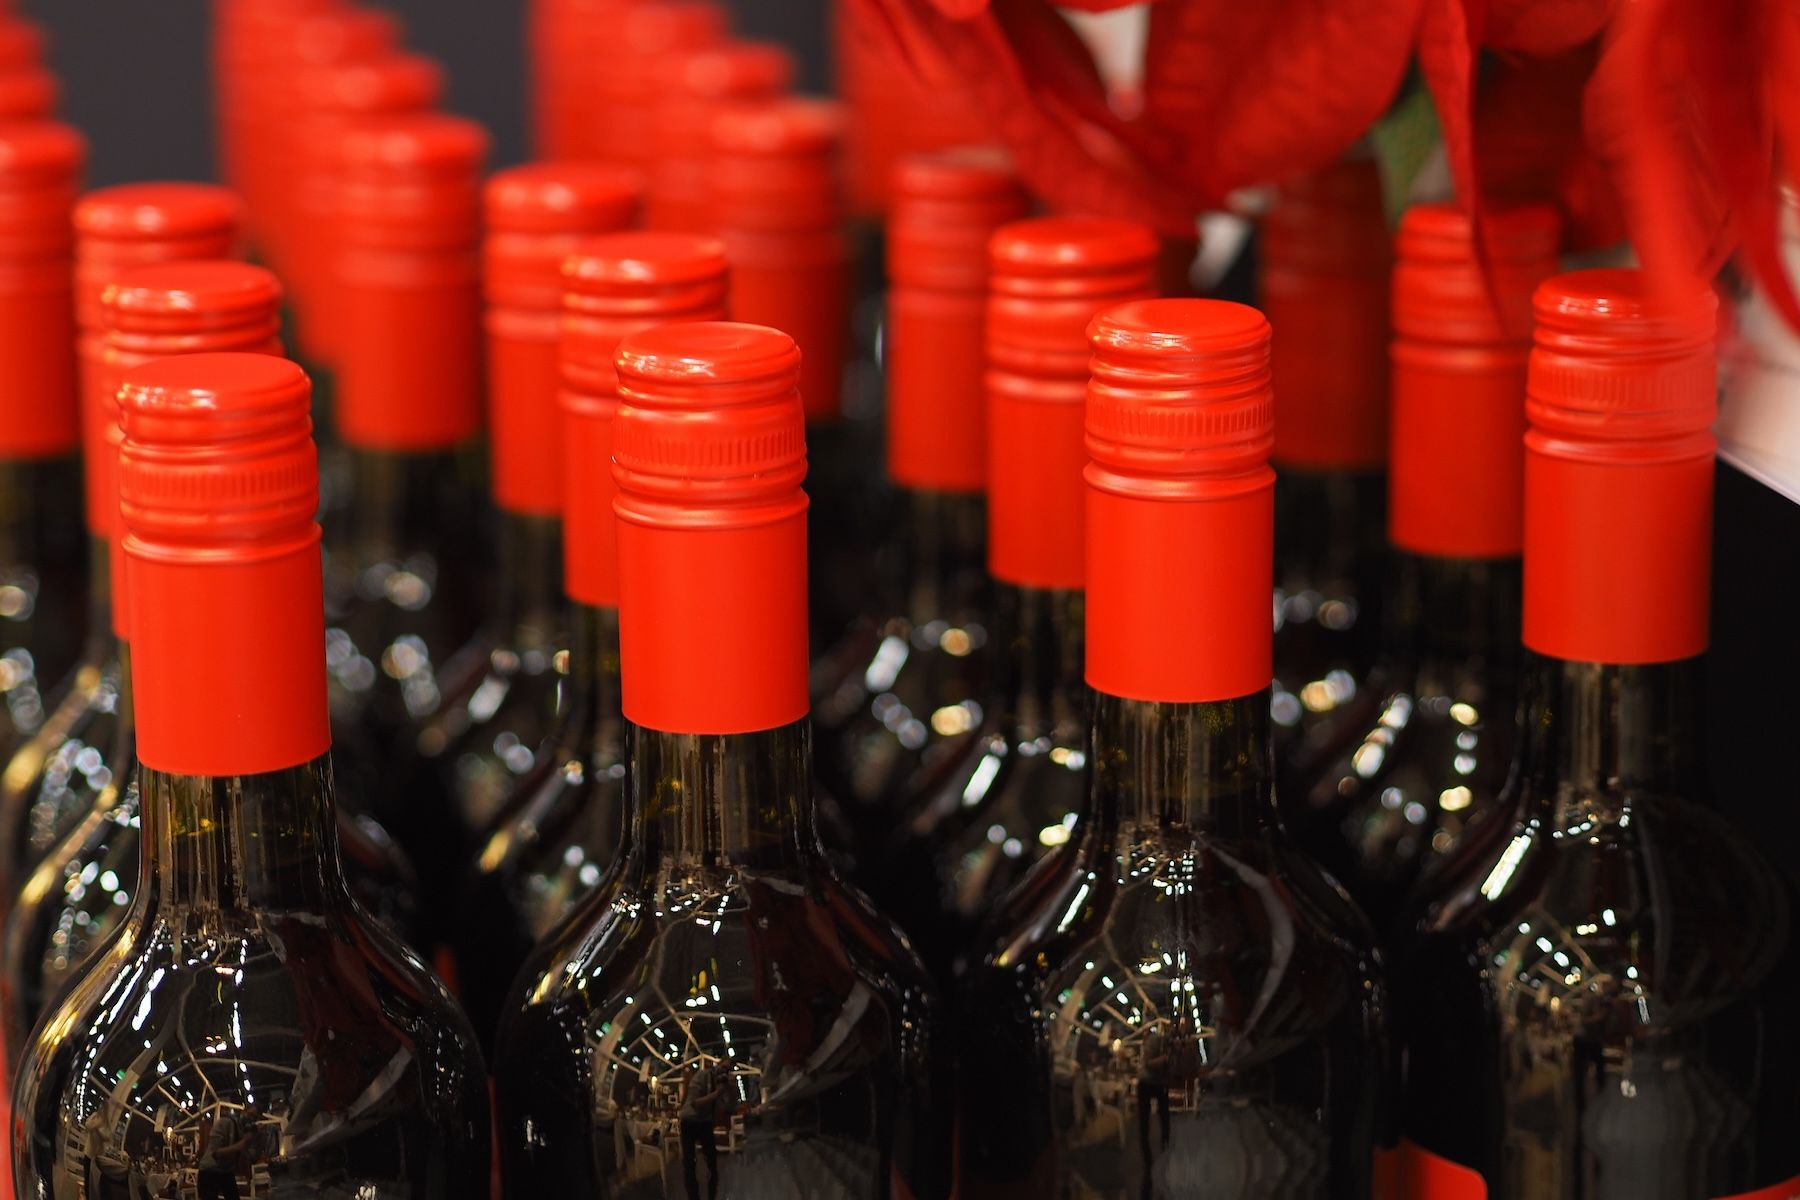 Group of red wine bottles ready to be exported